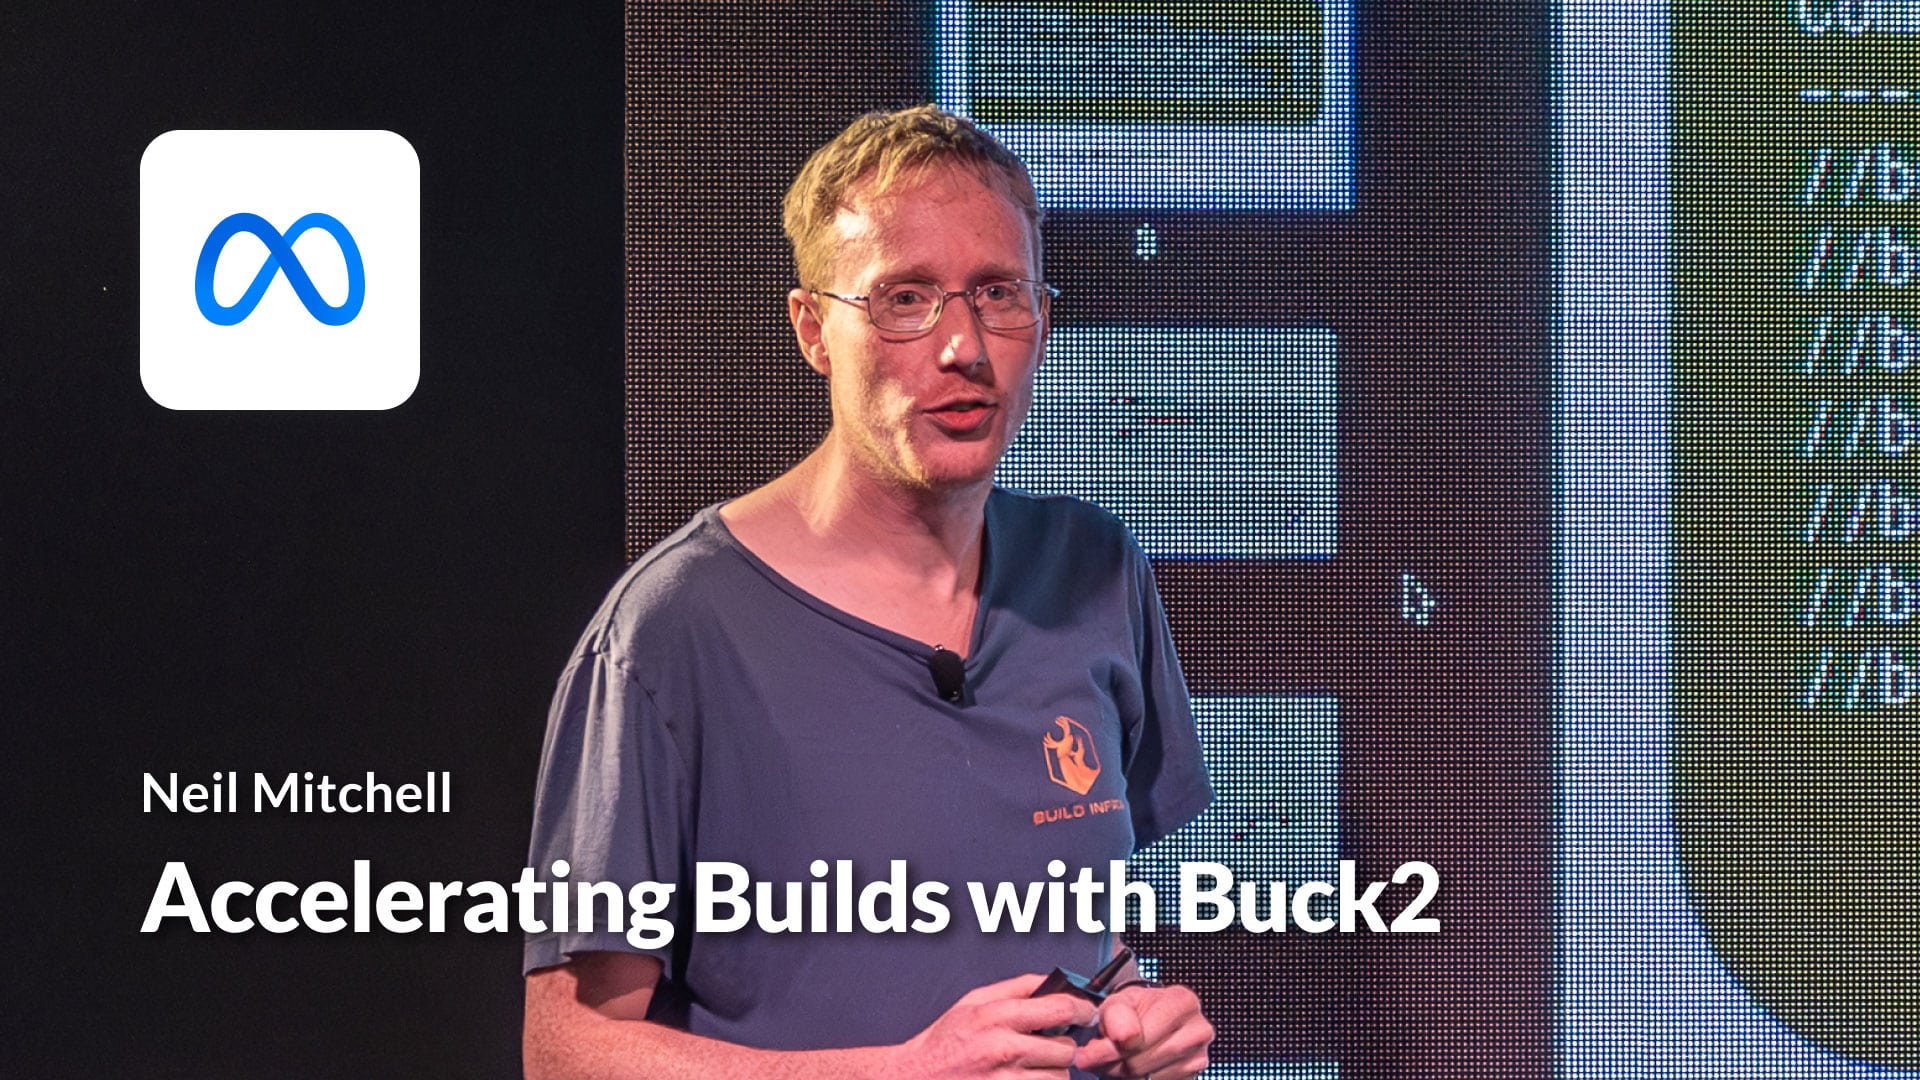 Accelerating Builds with Buck2